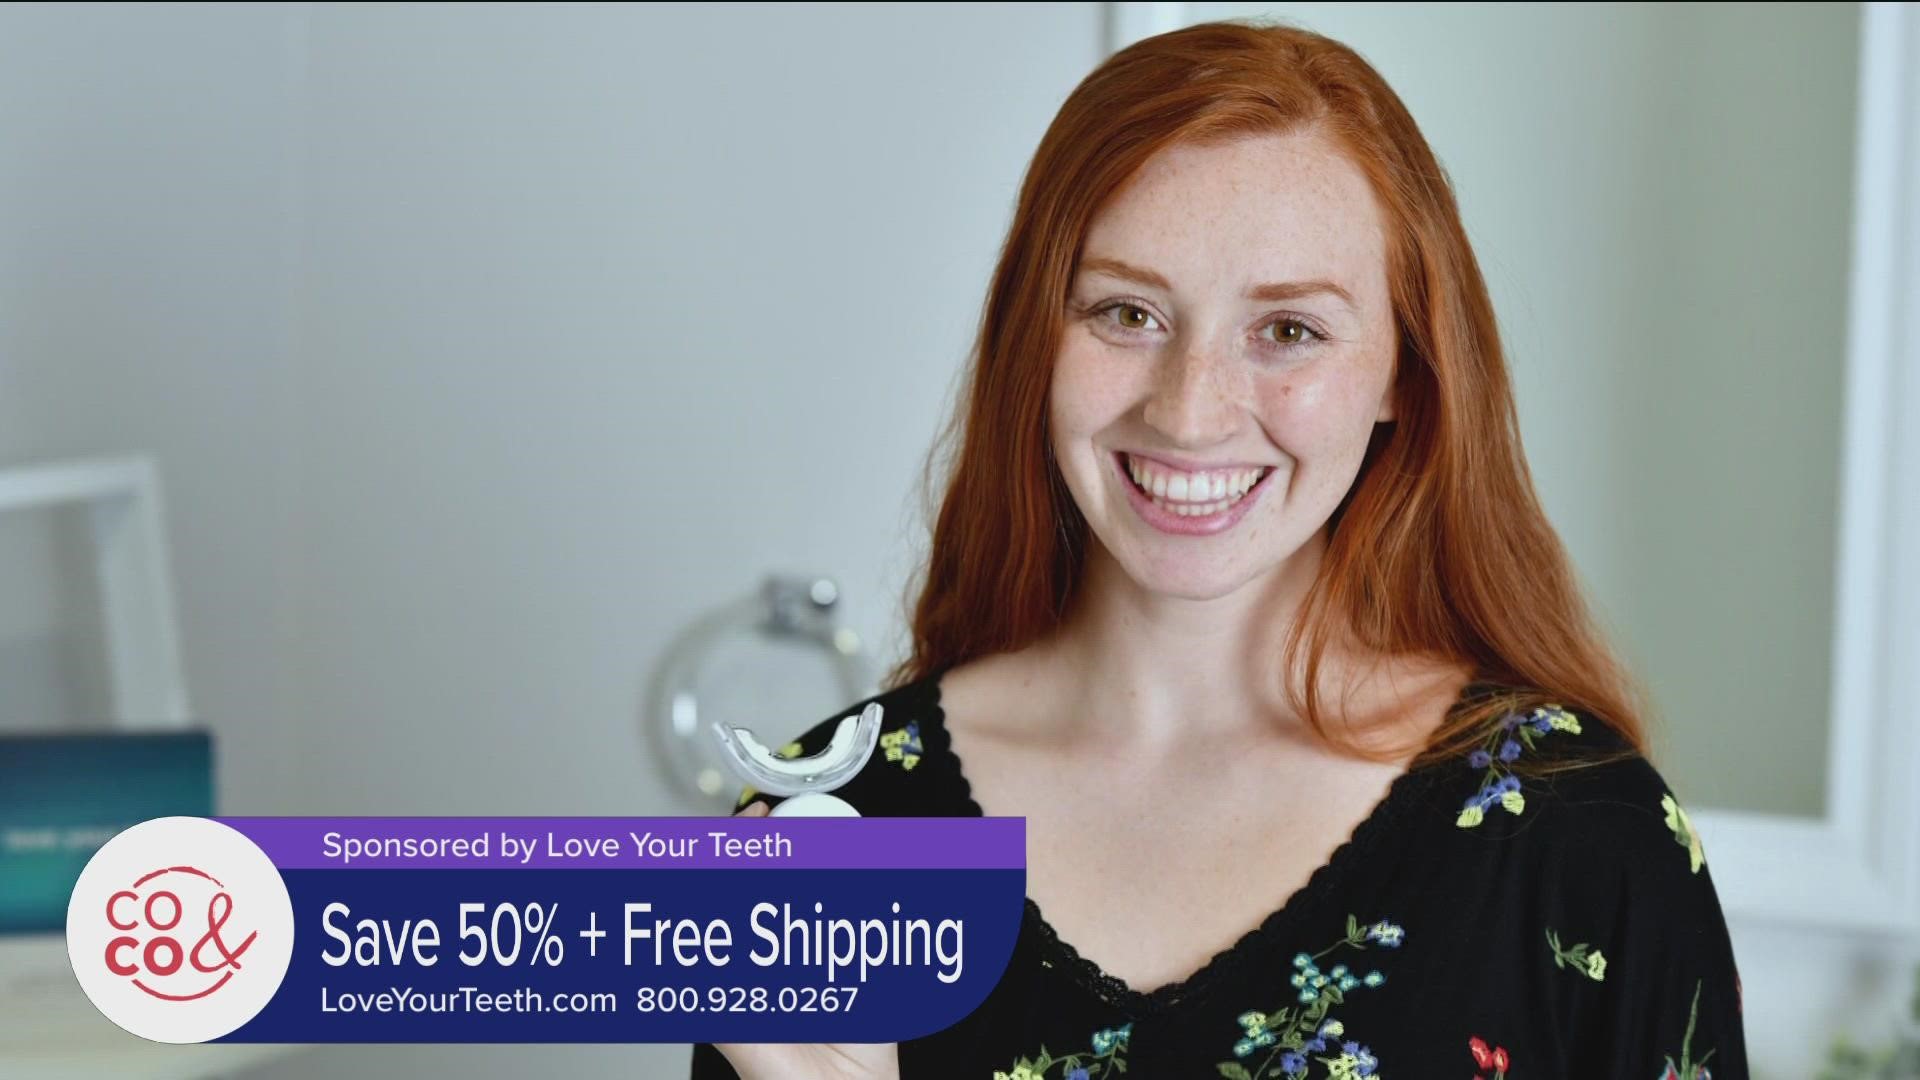 Save 50% on your Love Your Teeth Whitening System and get free shipping when you order at LoveYourTeeth.com. You Can also call 800.928.0267. **PAID CONTENT**